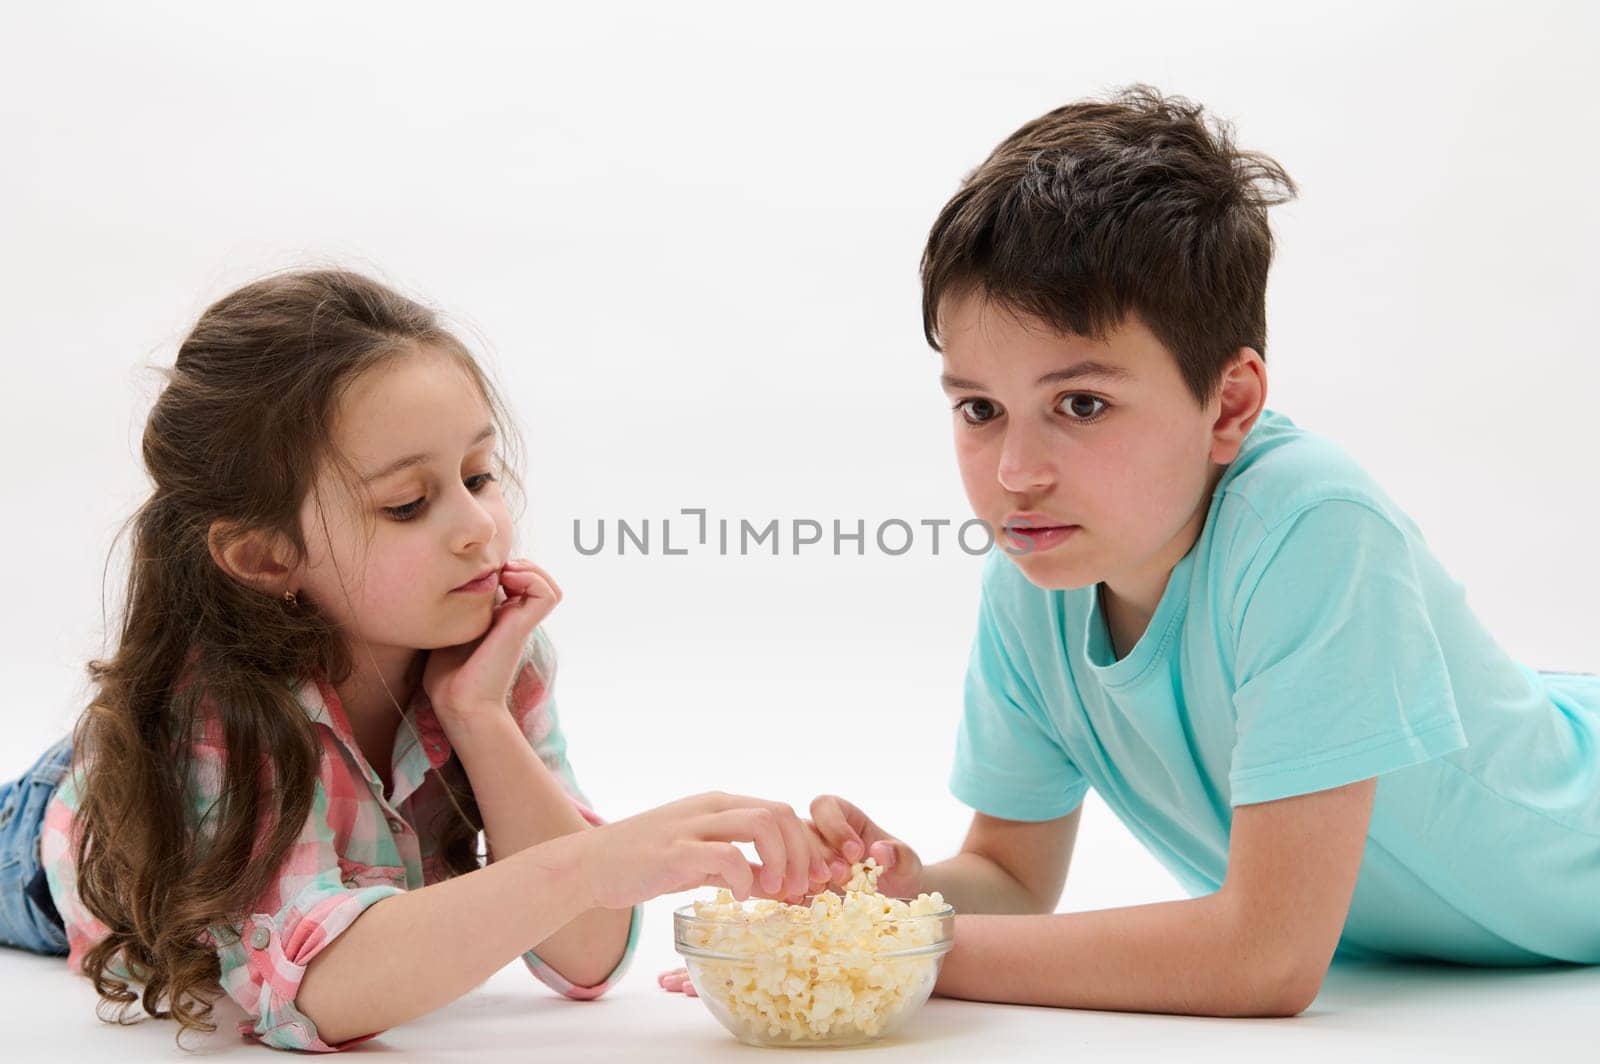 Beautiful happy children lying on belly, eating popcorn on isolated white background. Kids Childhood Lifestyle Leisure by artgf